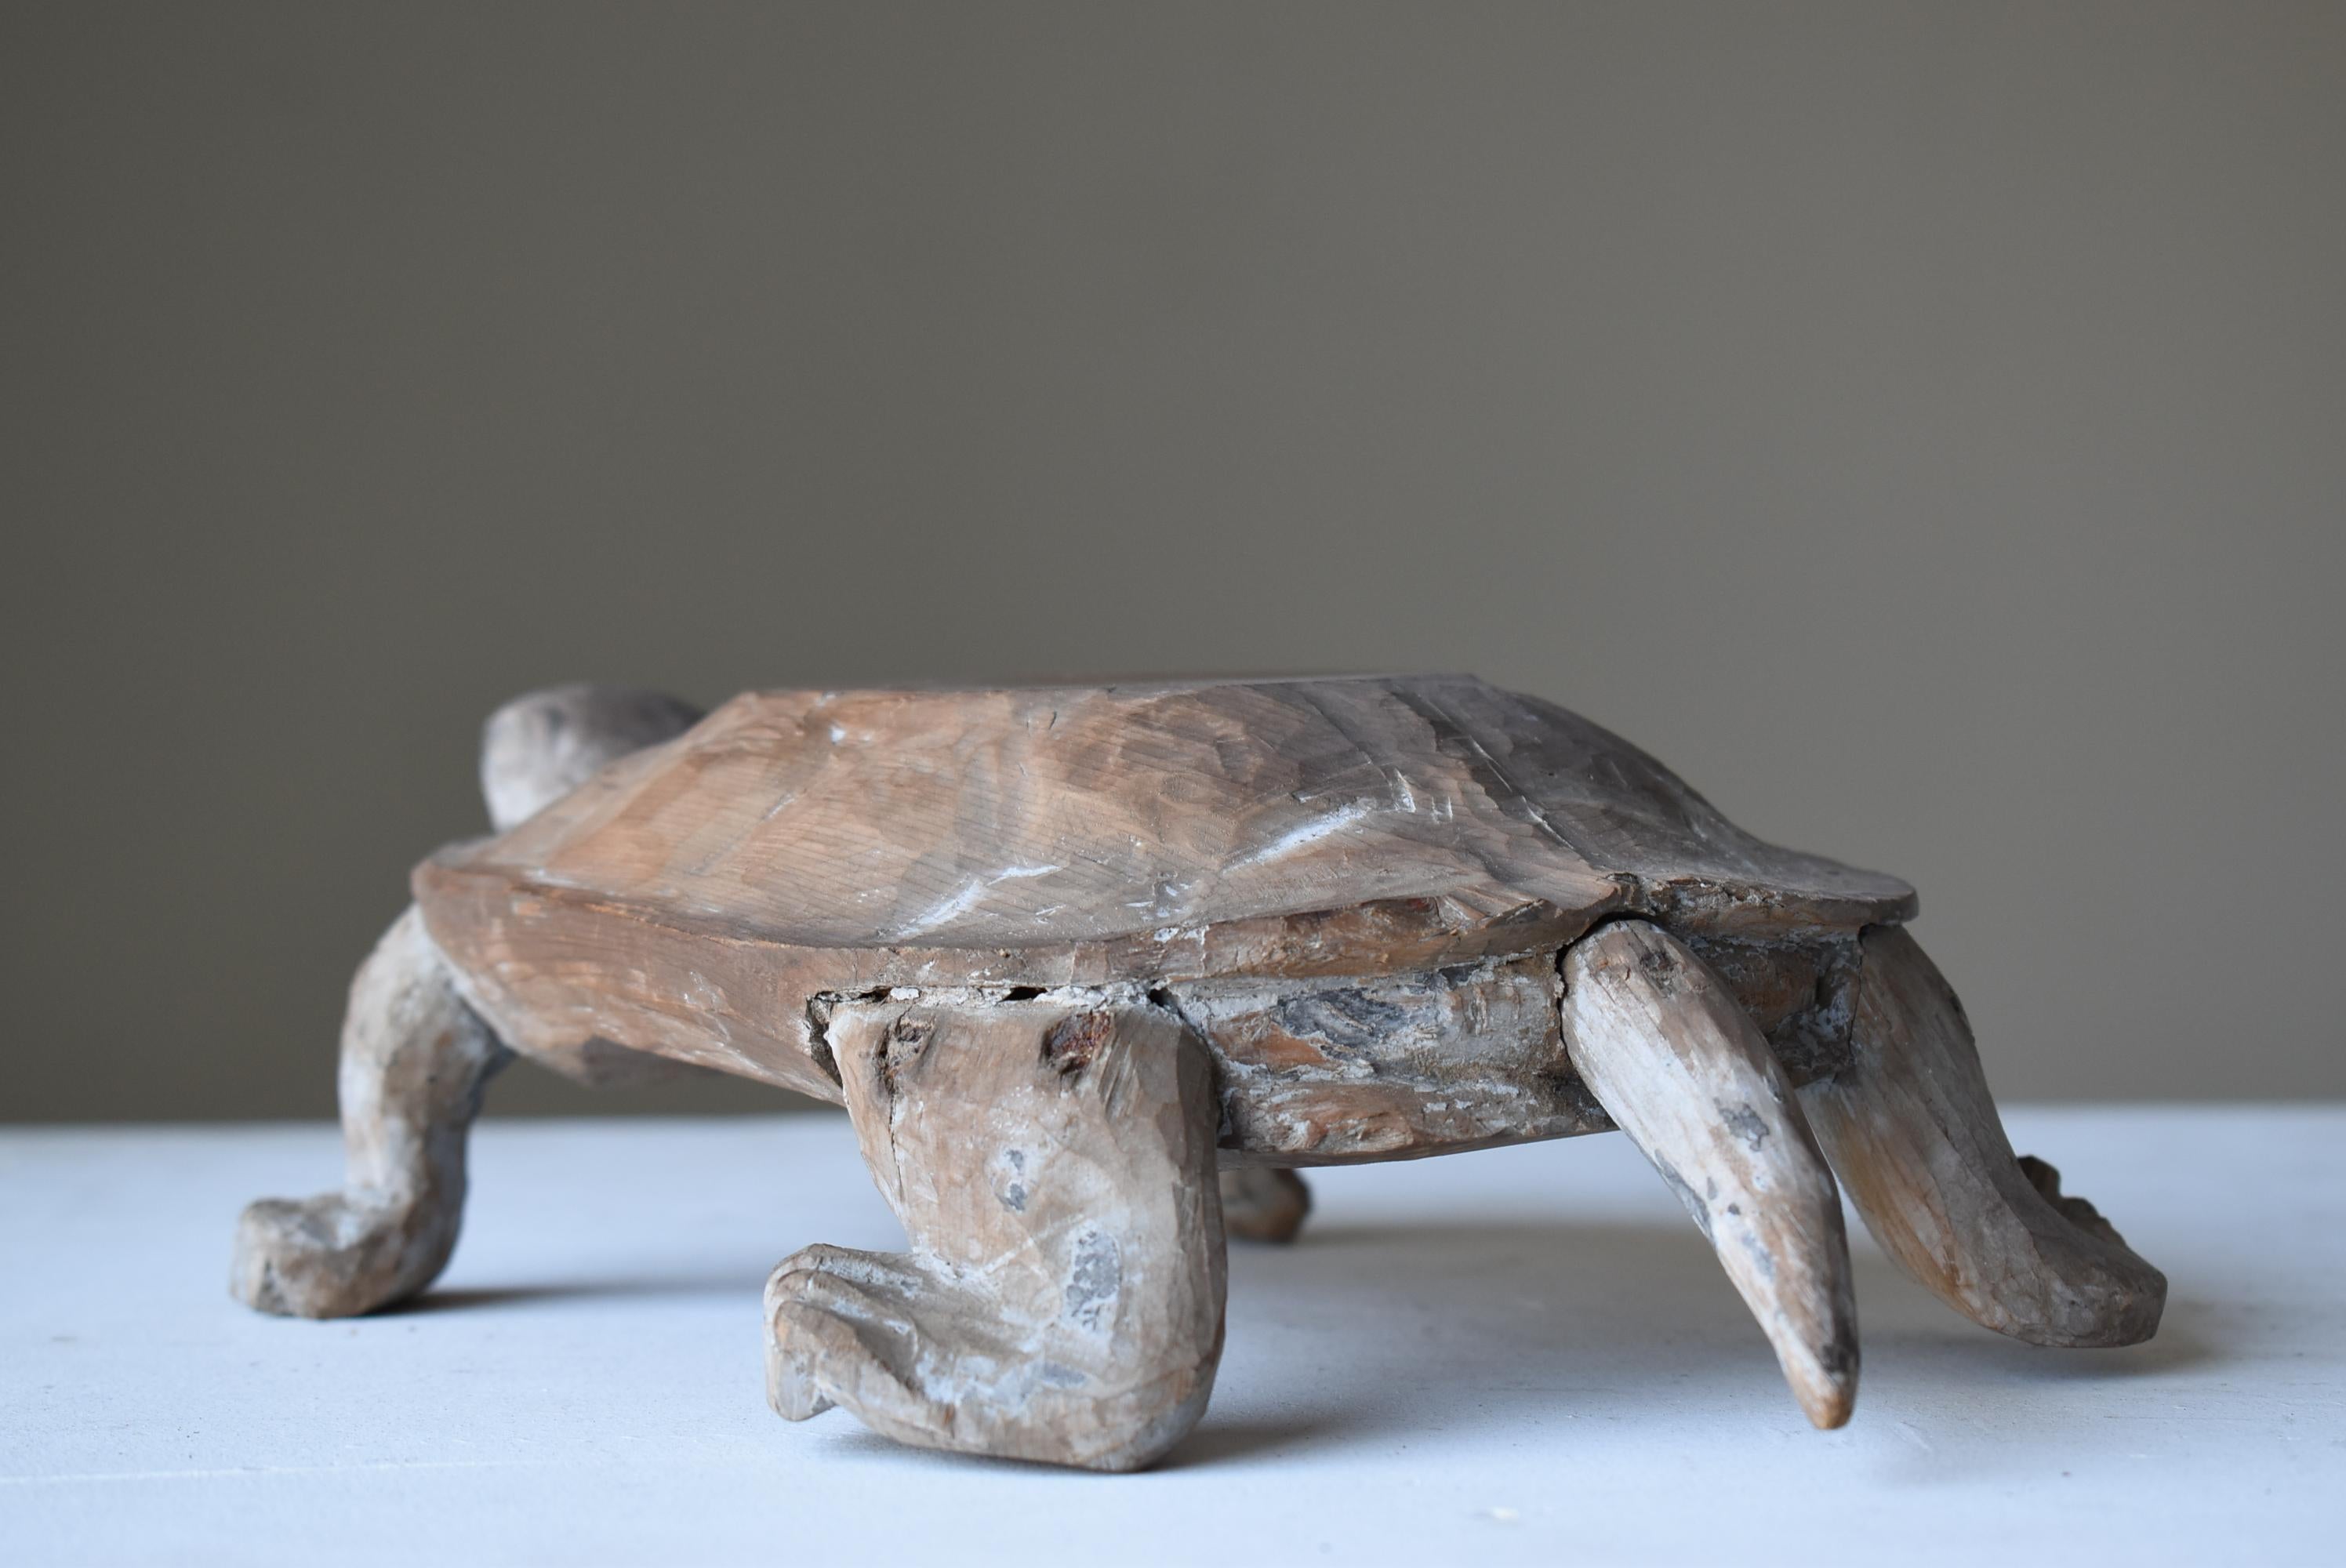 19th Century Japanese Antique Wood Carving Turtle 1800s-1860s/Folk Crafts Object Mingei For Sale